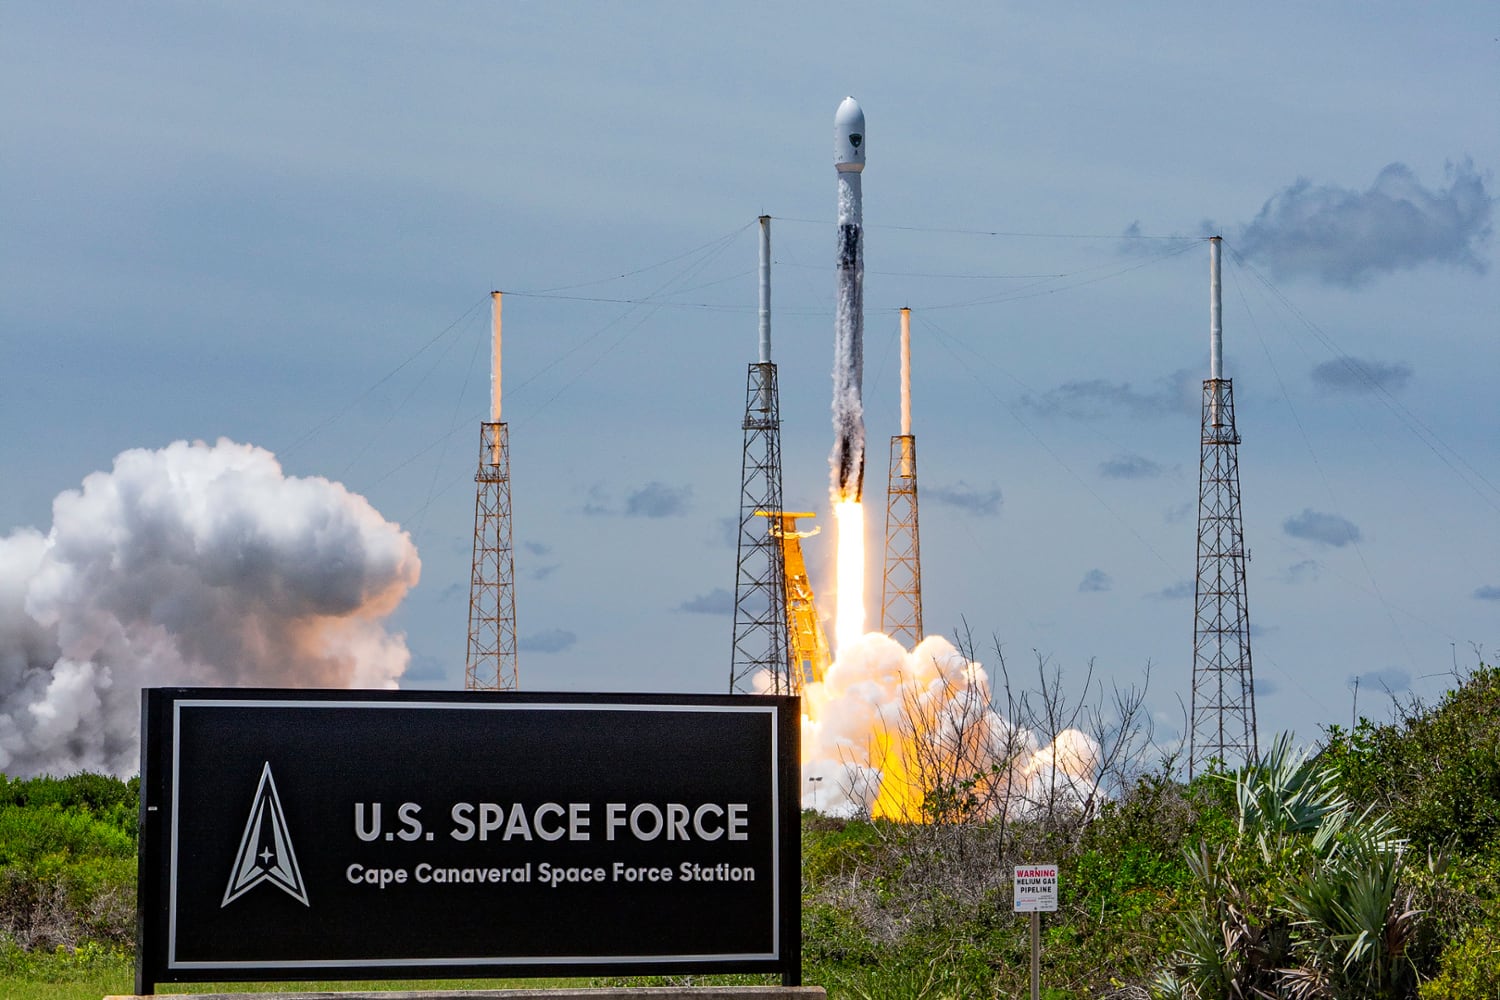 A launch takes place at Cape Canaveral Space Force Station. (Photo provided)